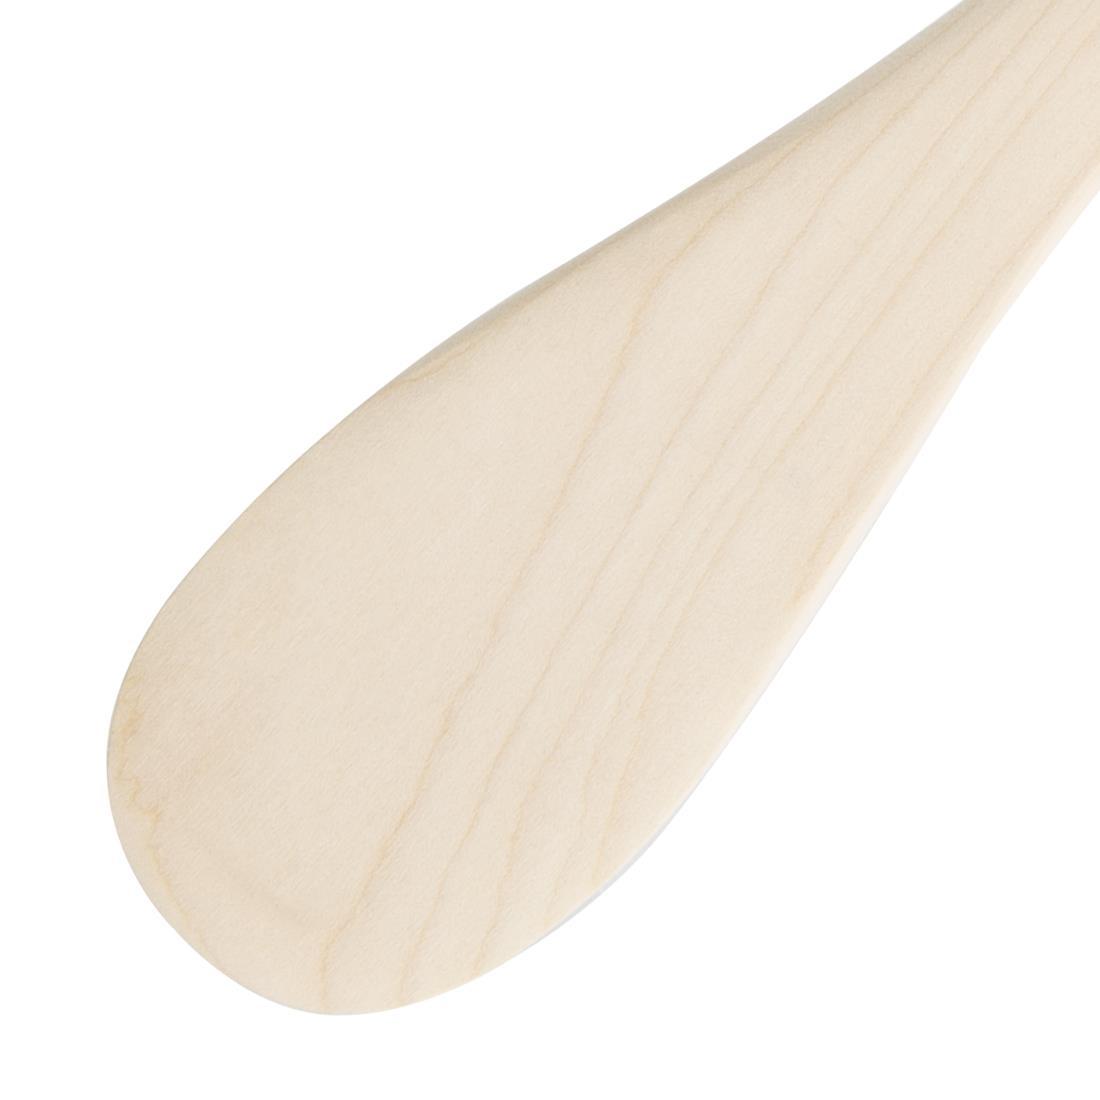 Vogue Round Ended Wooden Spatula 12" - J113  - 4